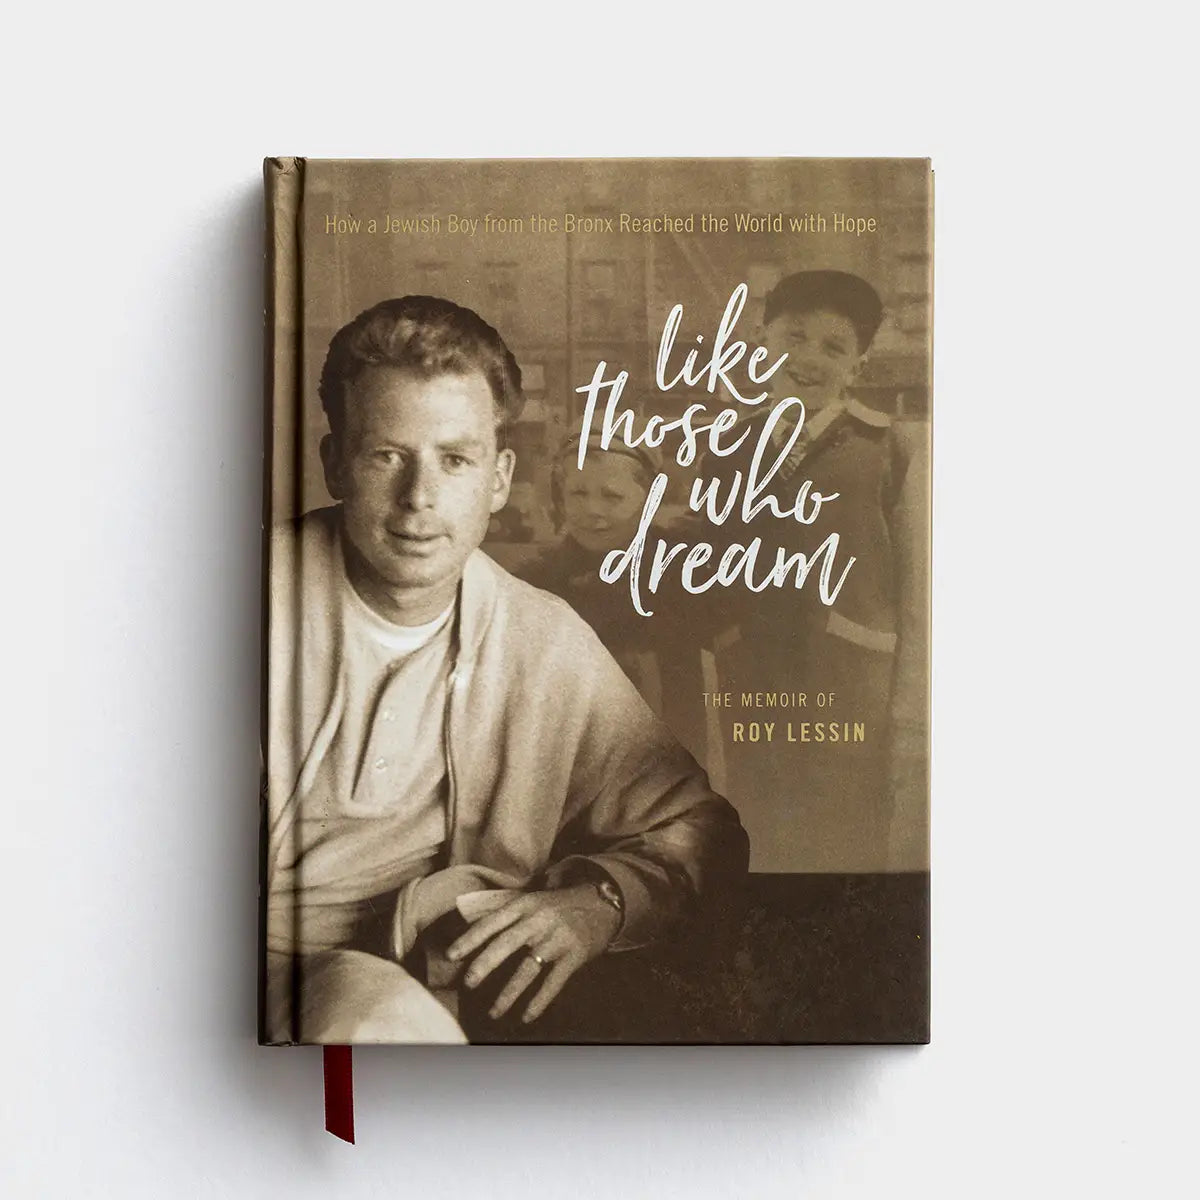 Daysprings Like Those Who Dream: How a Jewish Boy from the Bronx Reached the World with Hope - A Memoir